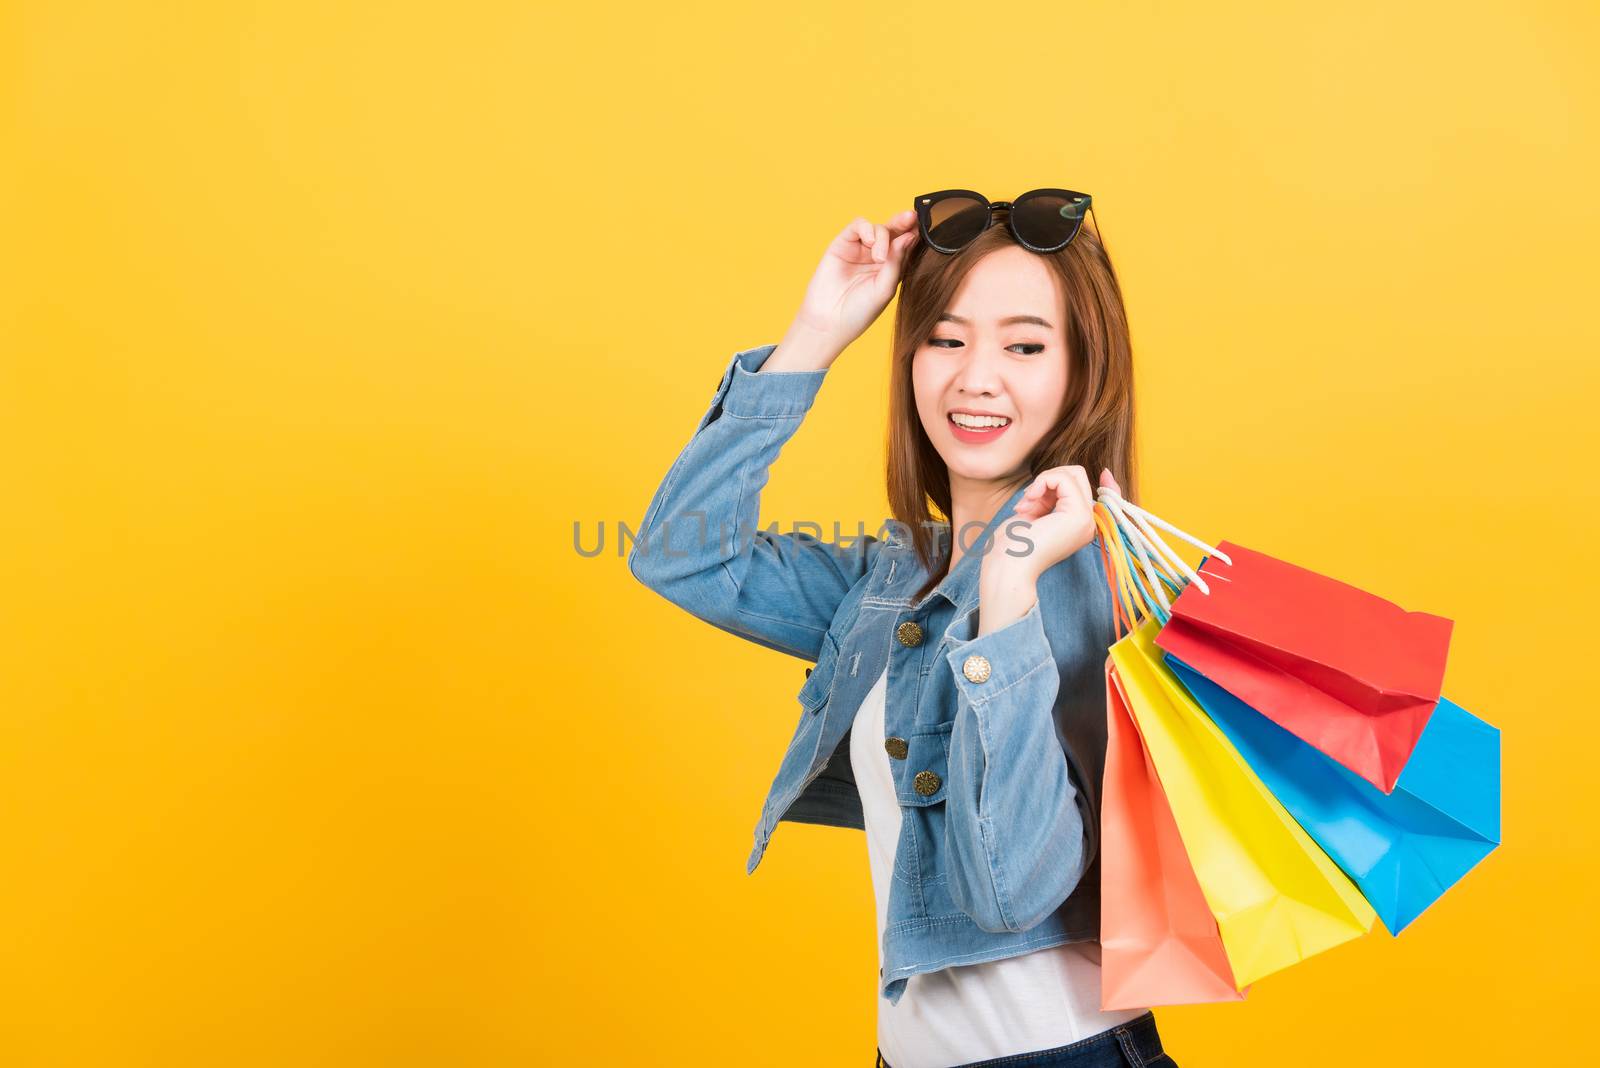 Asian happy portrait beautiful cute young woman teen smiling standing with sunglasses excited holding shopping bags multi color looking bags isolated, studio shot yellow background with copy space